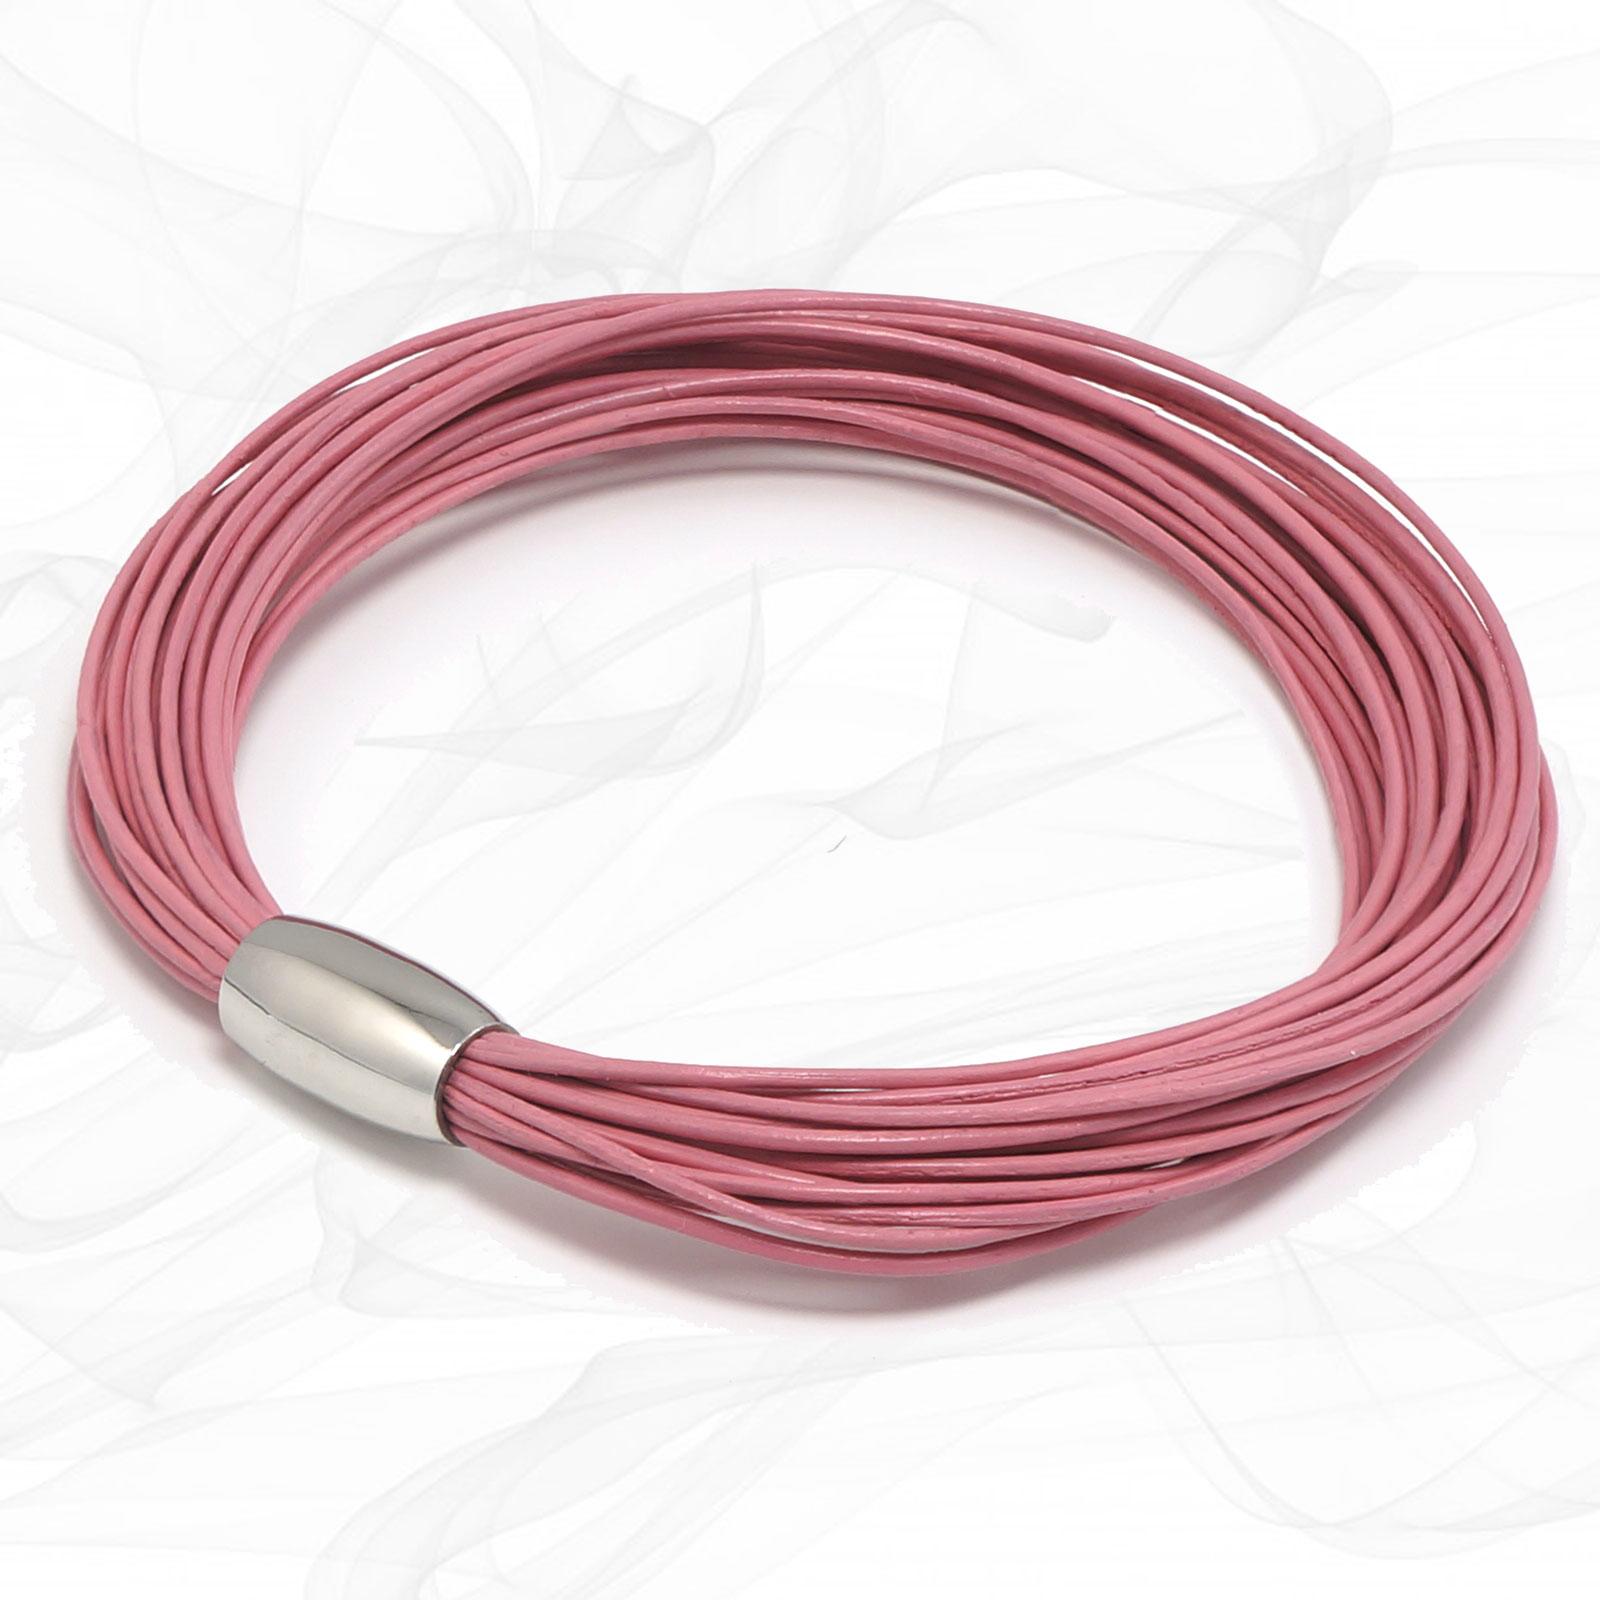 Pink Multi Strand Leather Bracelet for Women, one size, Limited Edition. With strong Magnetic Clasp.